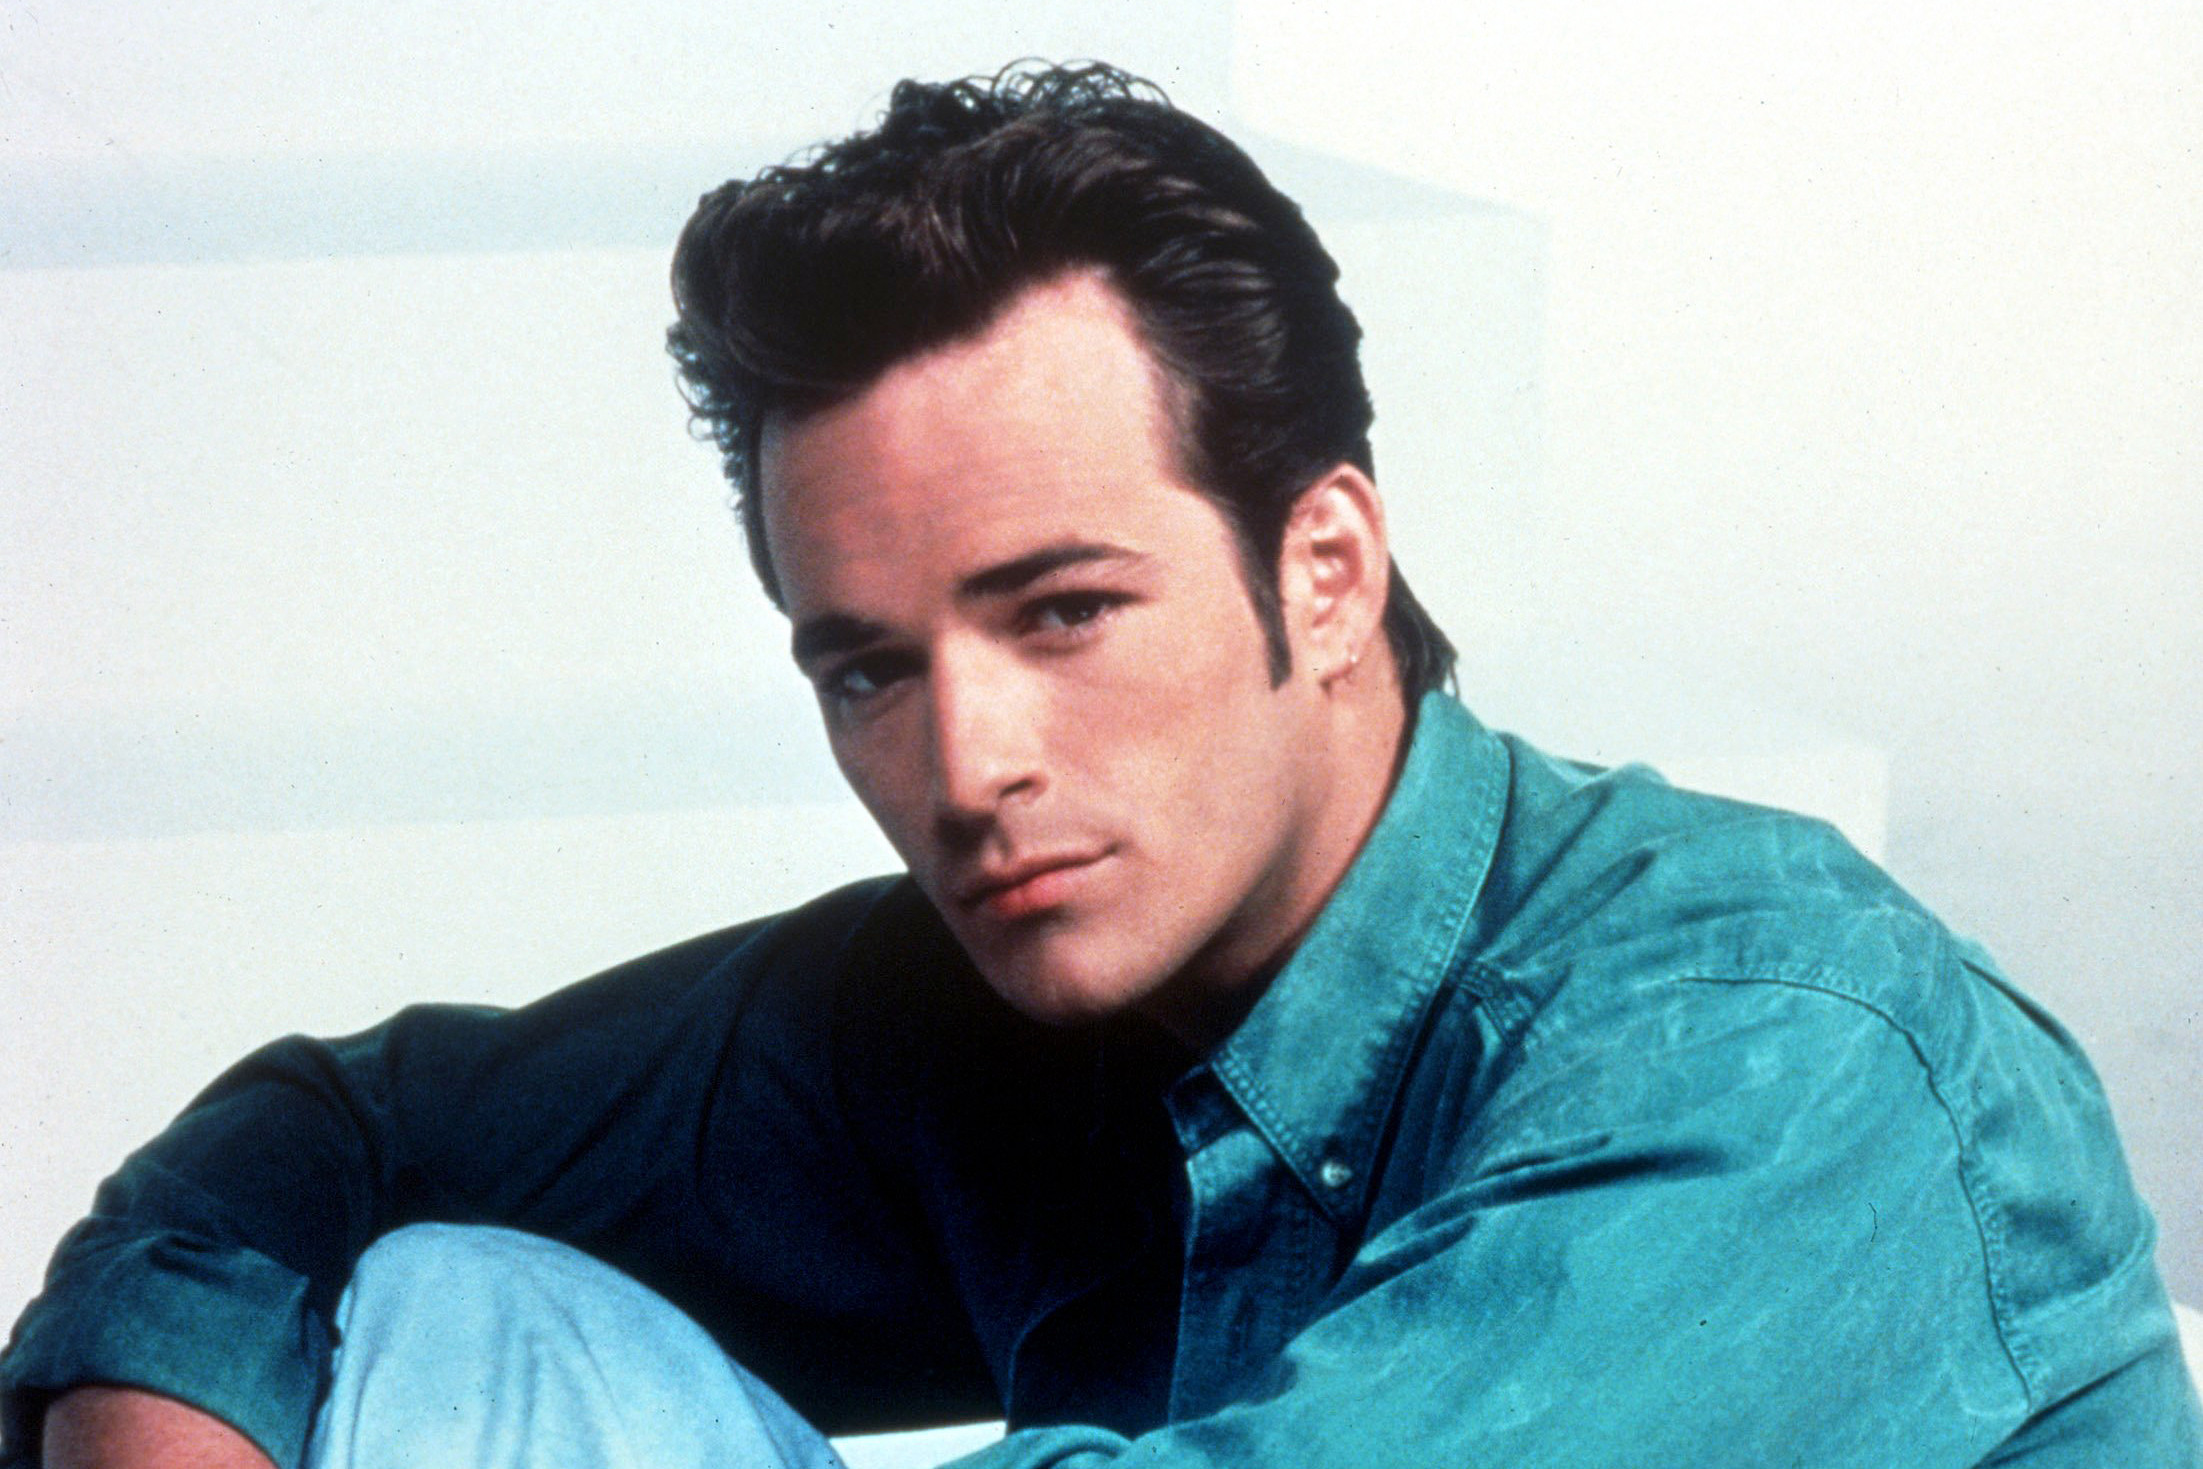 Editorial use only
Mandatory Credit: Photo by Snap/REX/Shutterstock (390866dw)
FILM STILLS OF &#039;BEVERLY HILLS, 90210 - TV&#039; WITH 1991, LUKE PERRY IN 1991
VARIOUS